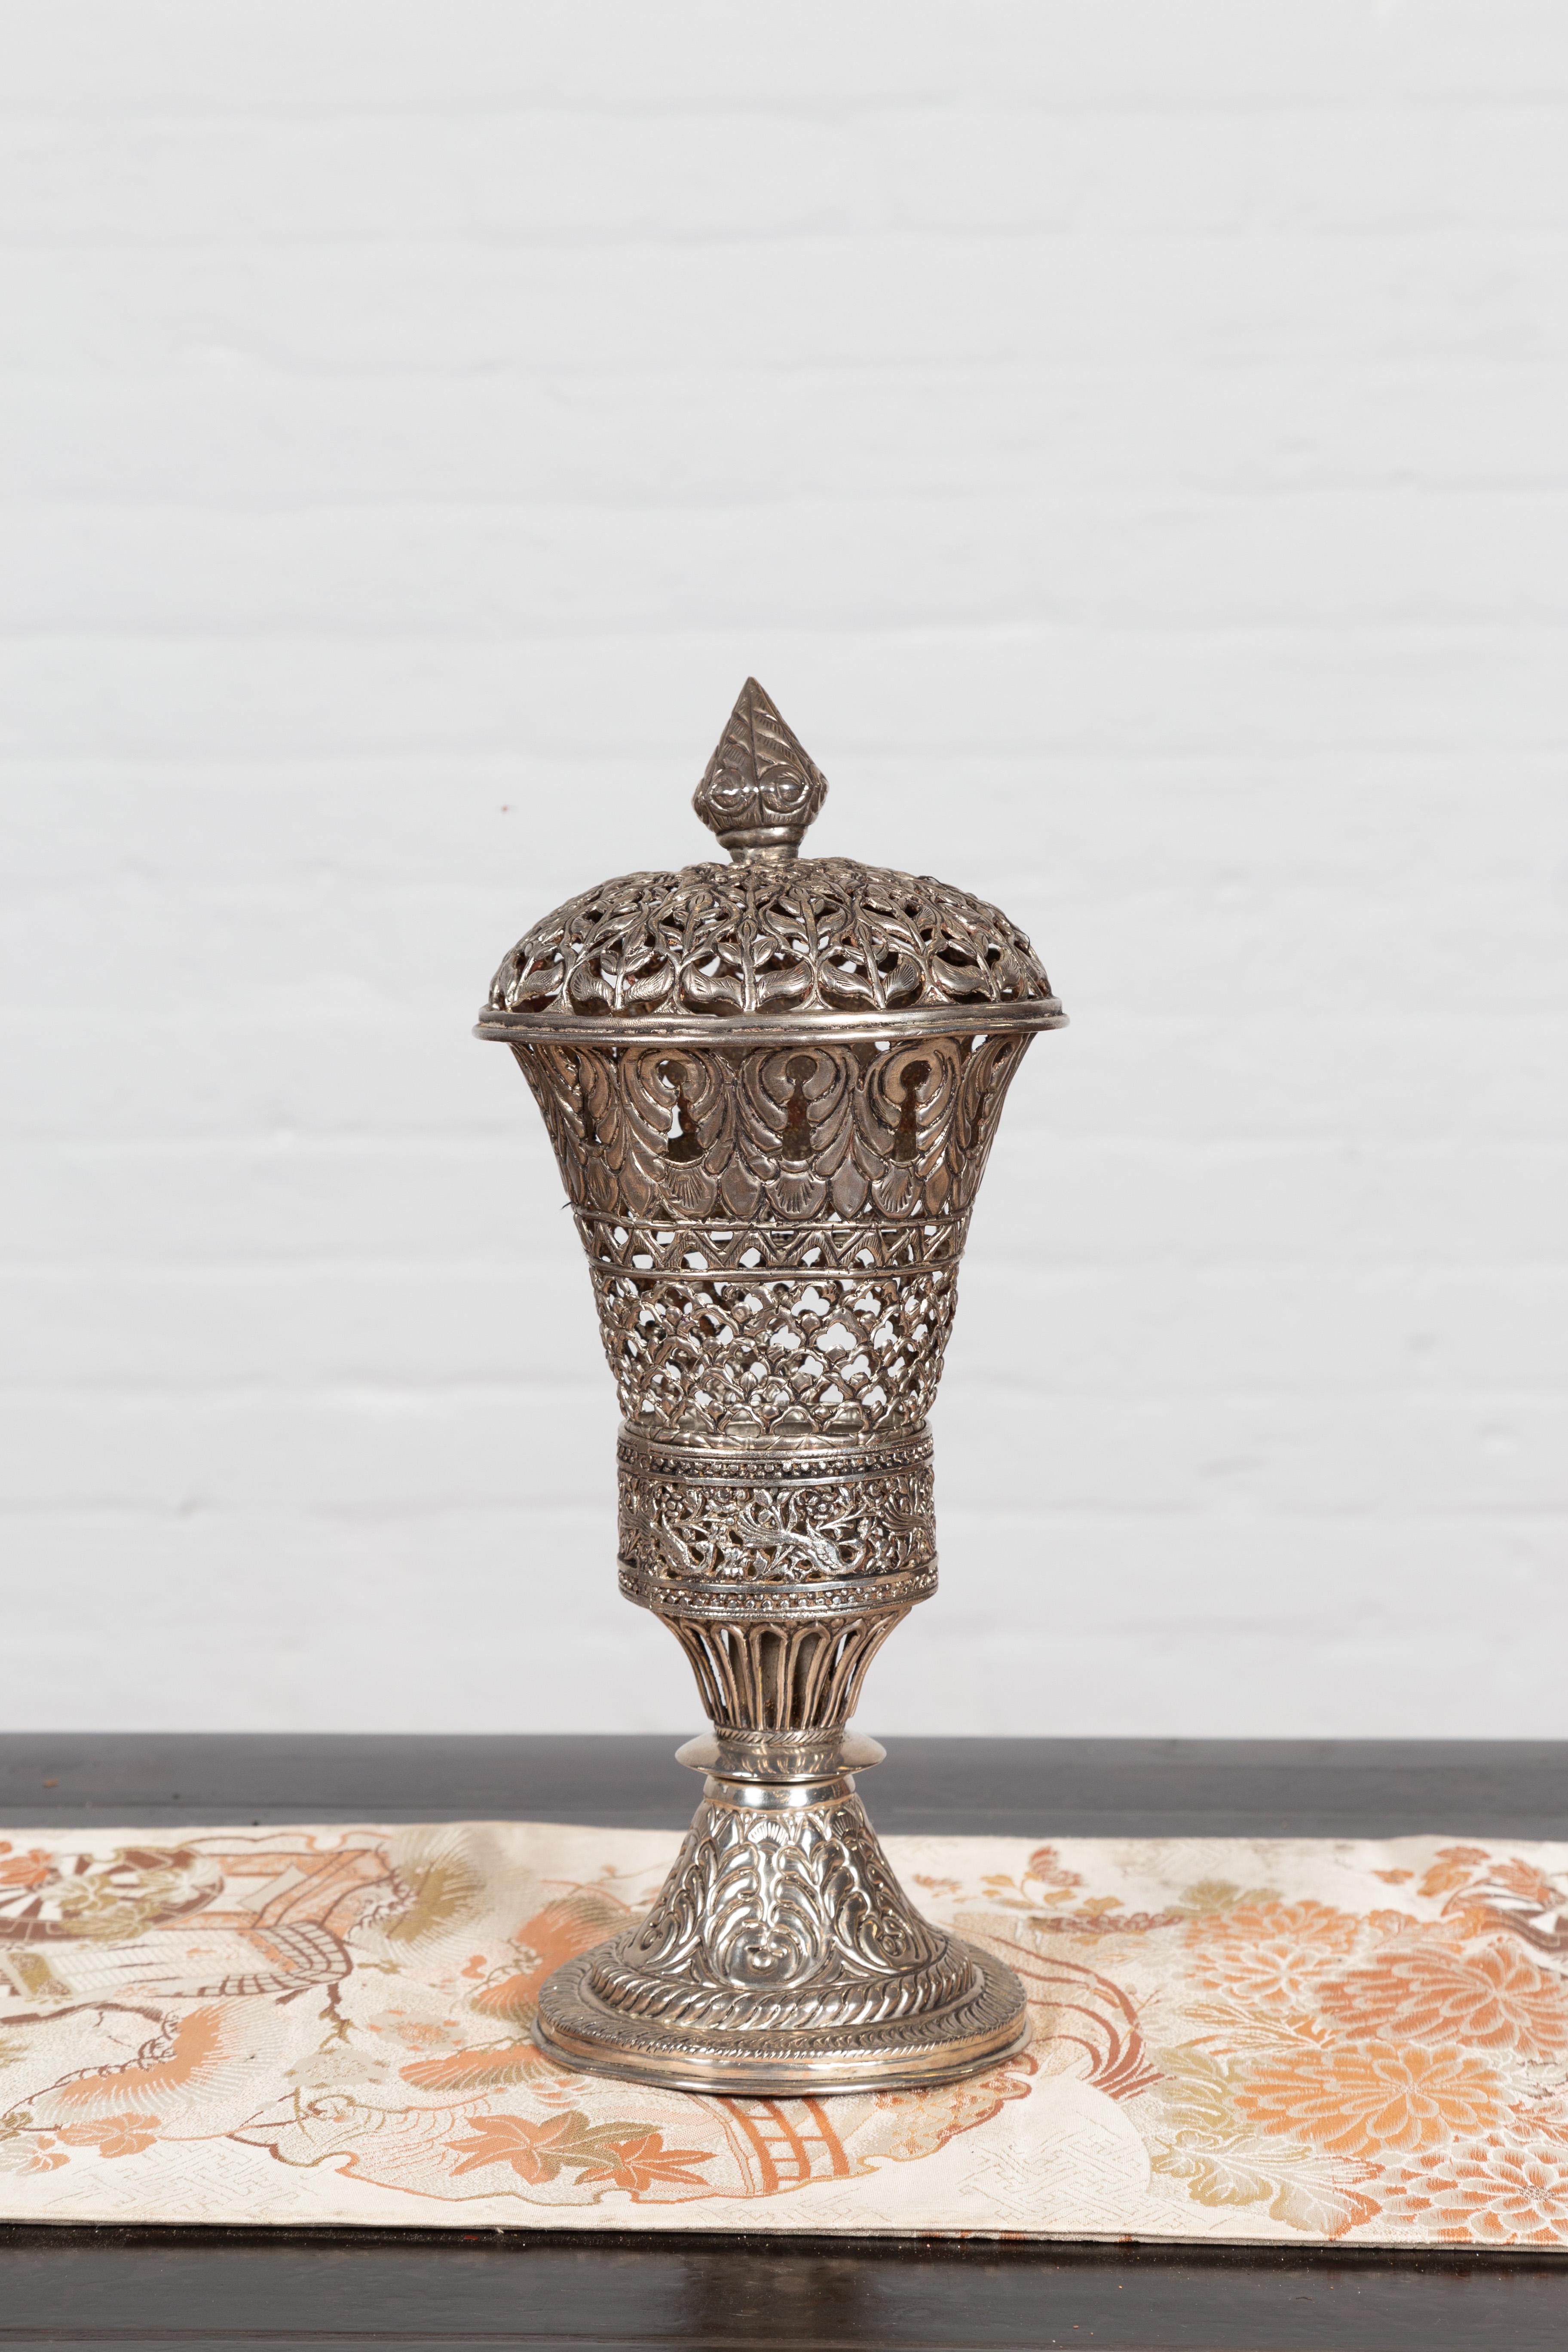 20th Century Indian Vintage Silverplate Brass Covered Candle Holder with Open Fretwork